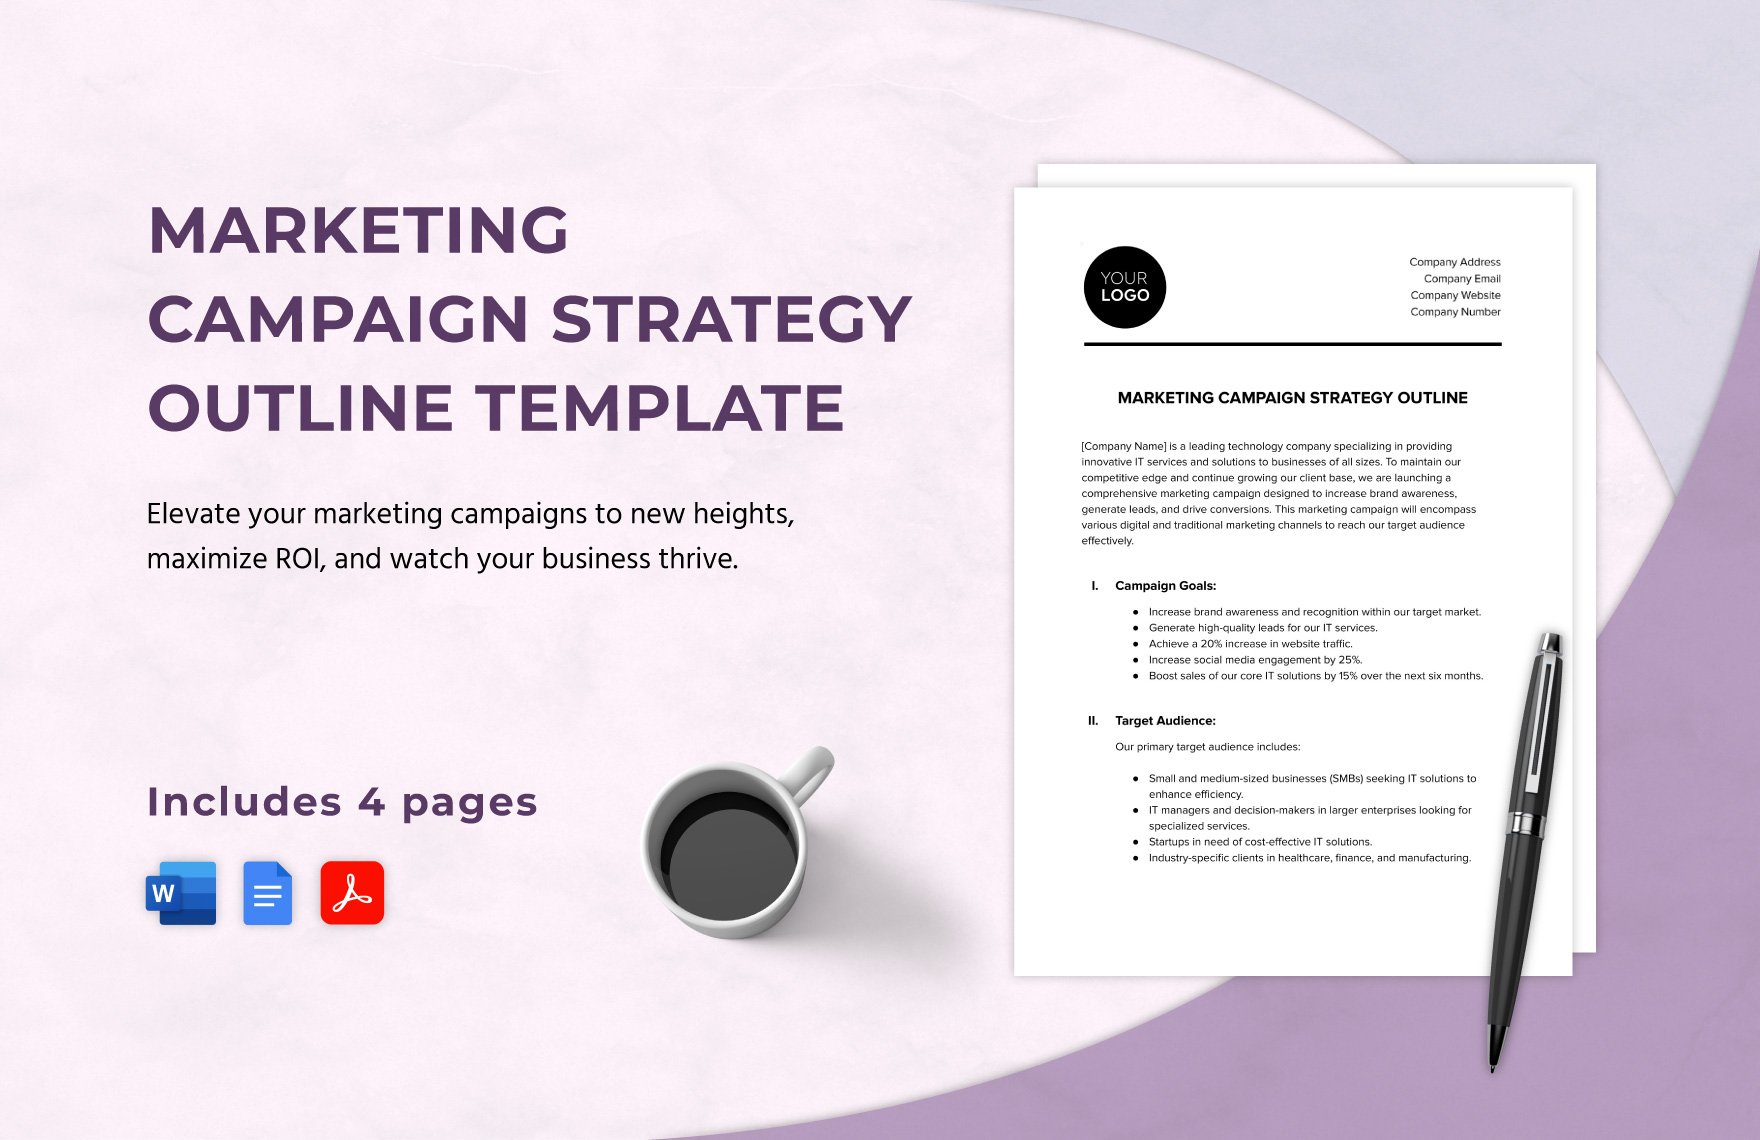 Marketing Campaign Strategy Outline Template in Word, Google Docs, PDF